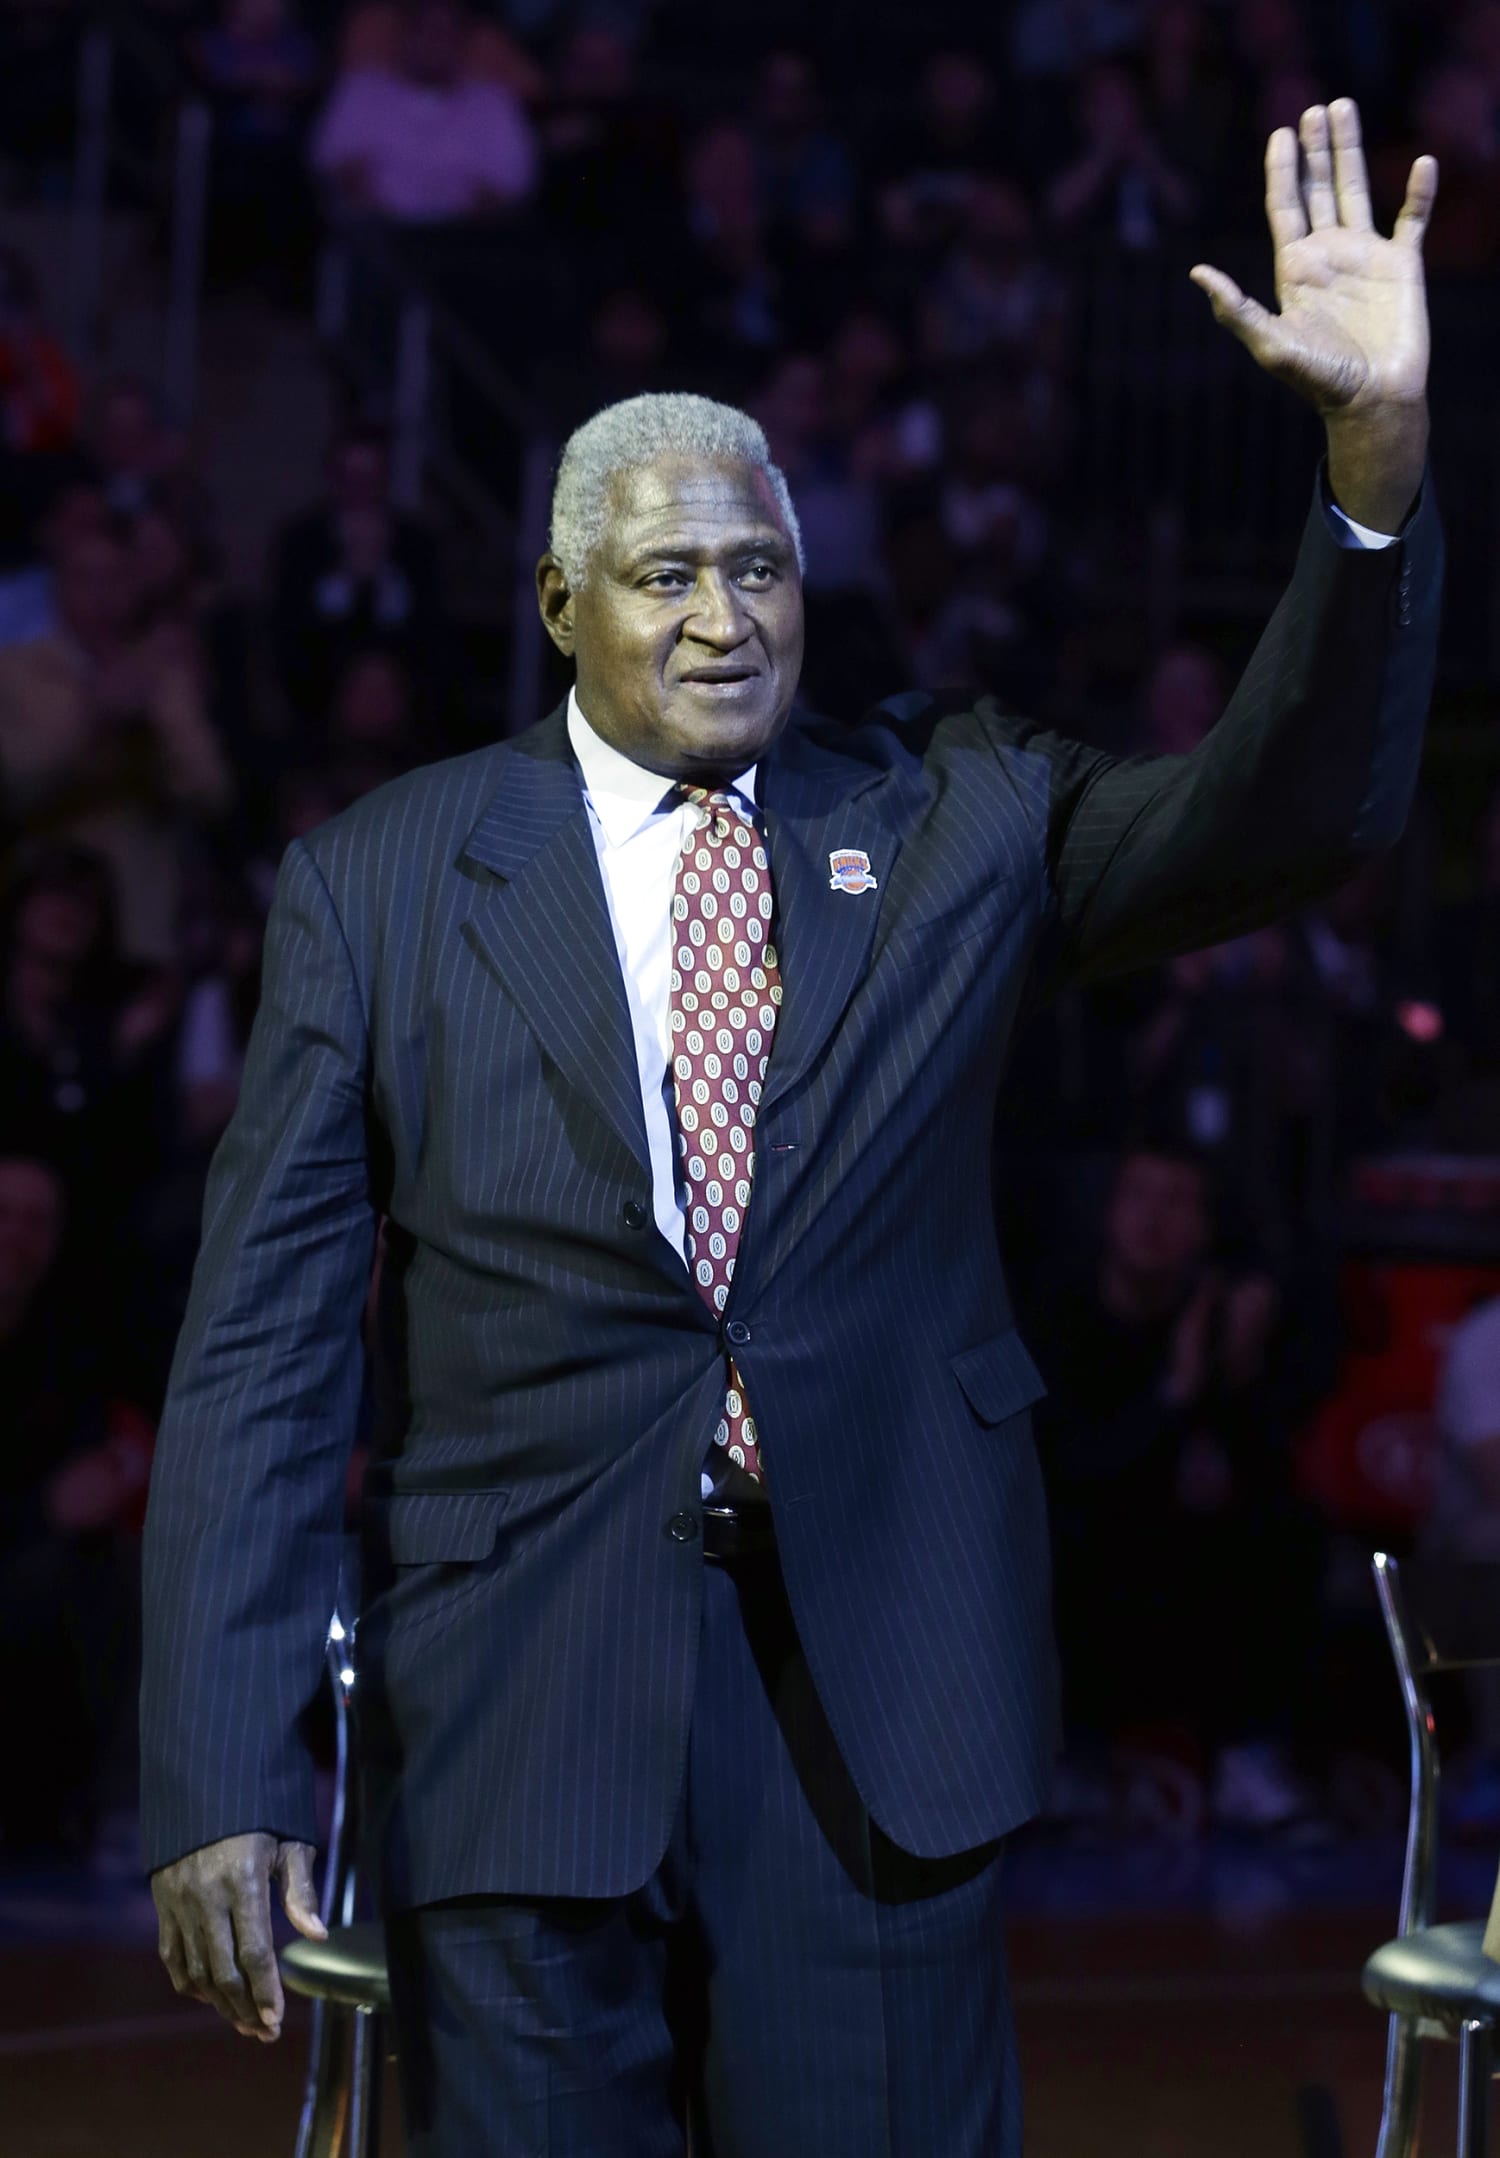 Willis Reed, who led the Knicks to their first NBA title in a dramatic Game 7, dies at 80